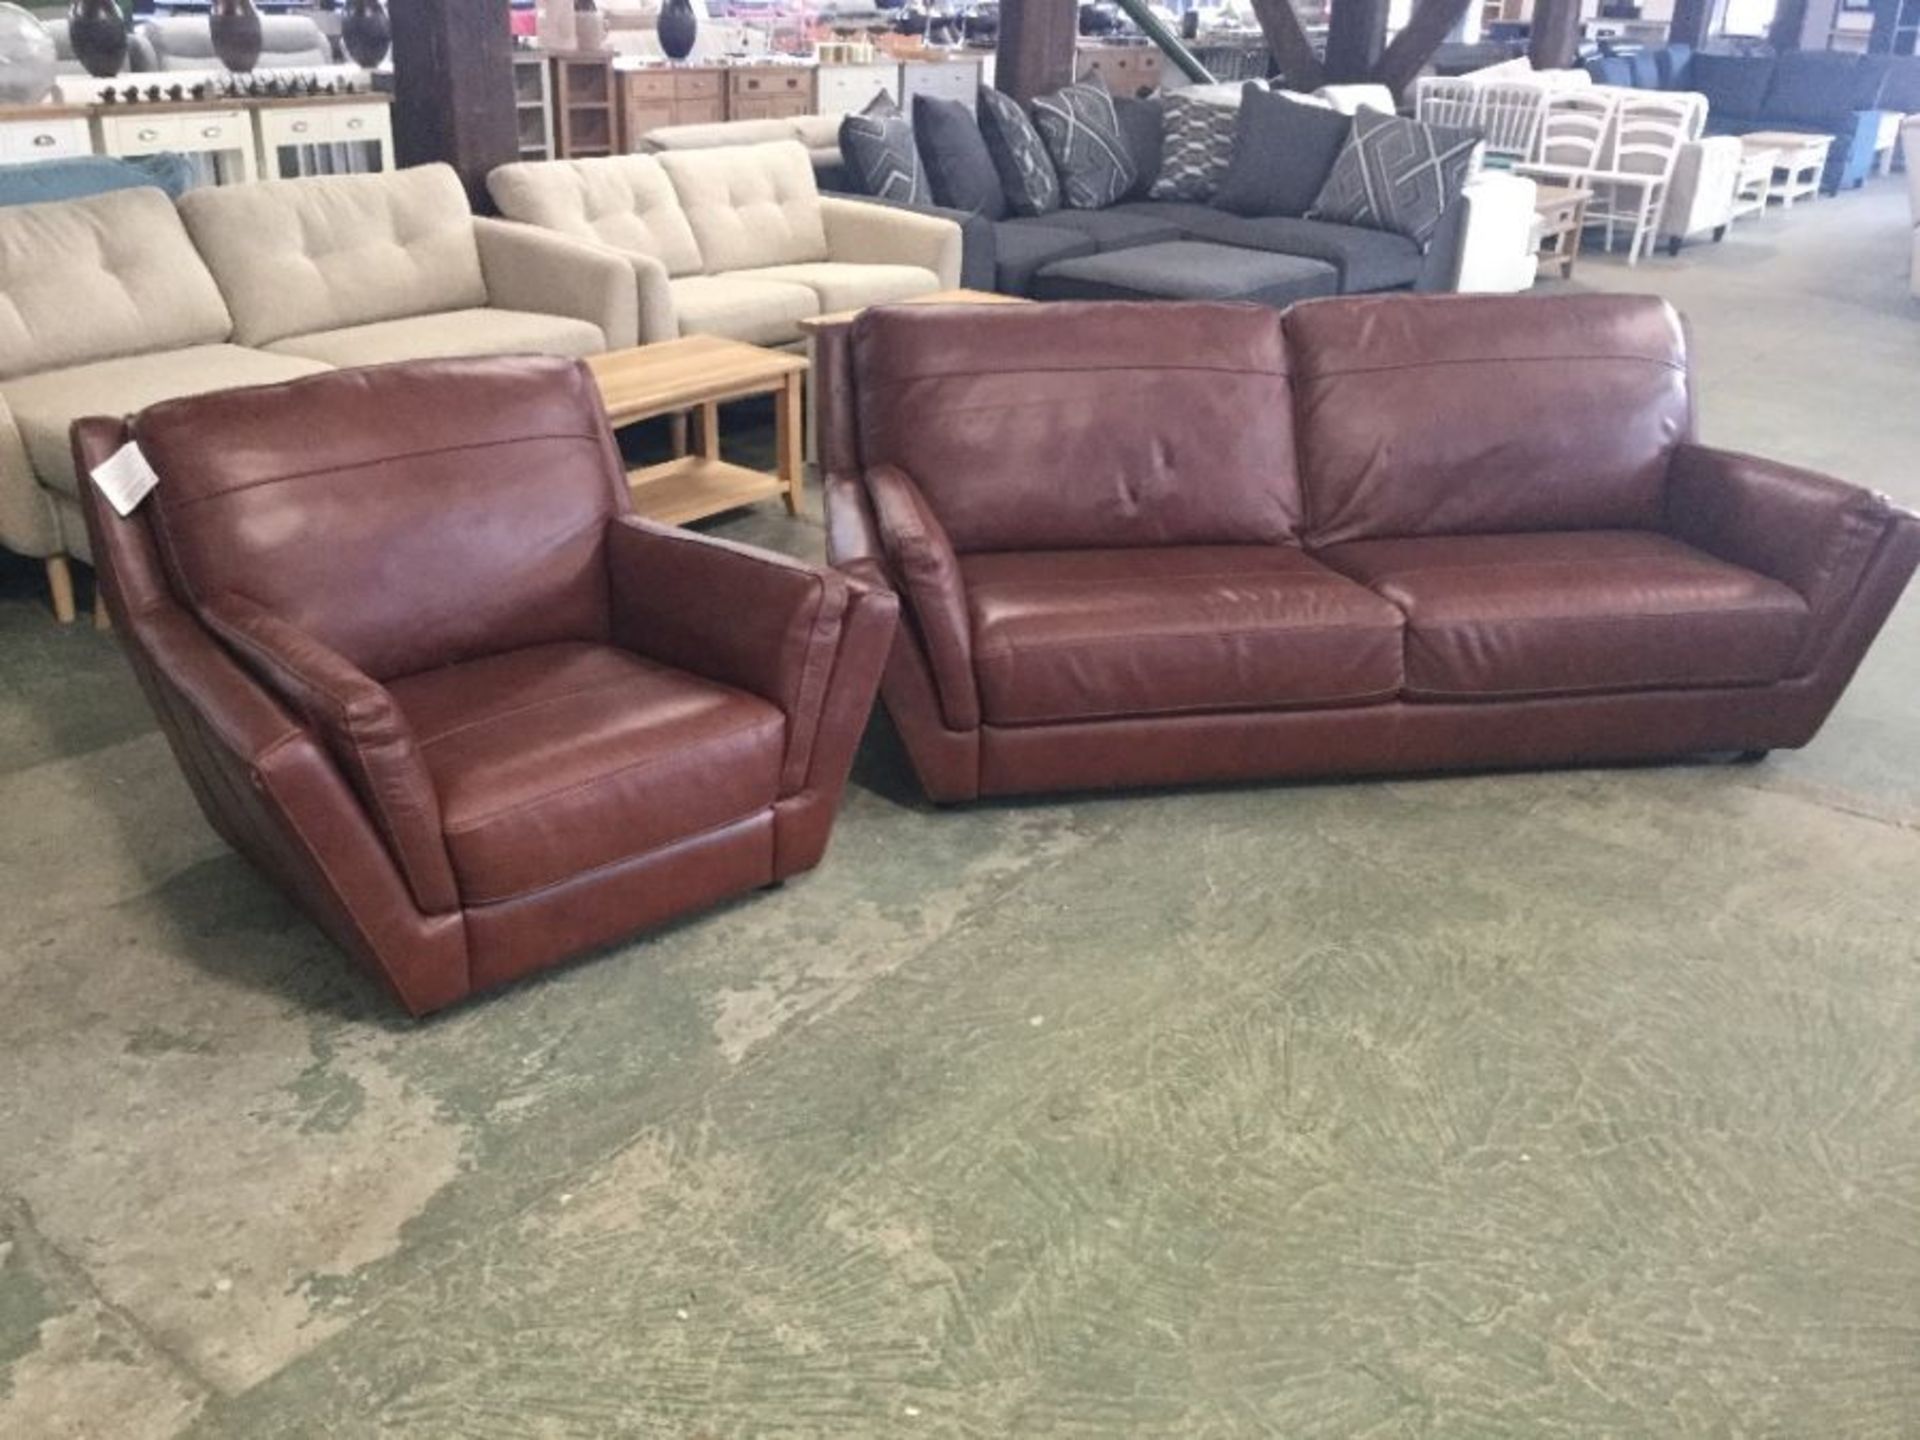 FELLINI TAN LEATHER 3 SEATER AND CHAIR (SCUFFED MISSING CORRECT FEET FAULTY ARM)(S1-9-10)